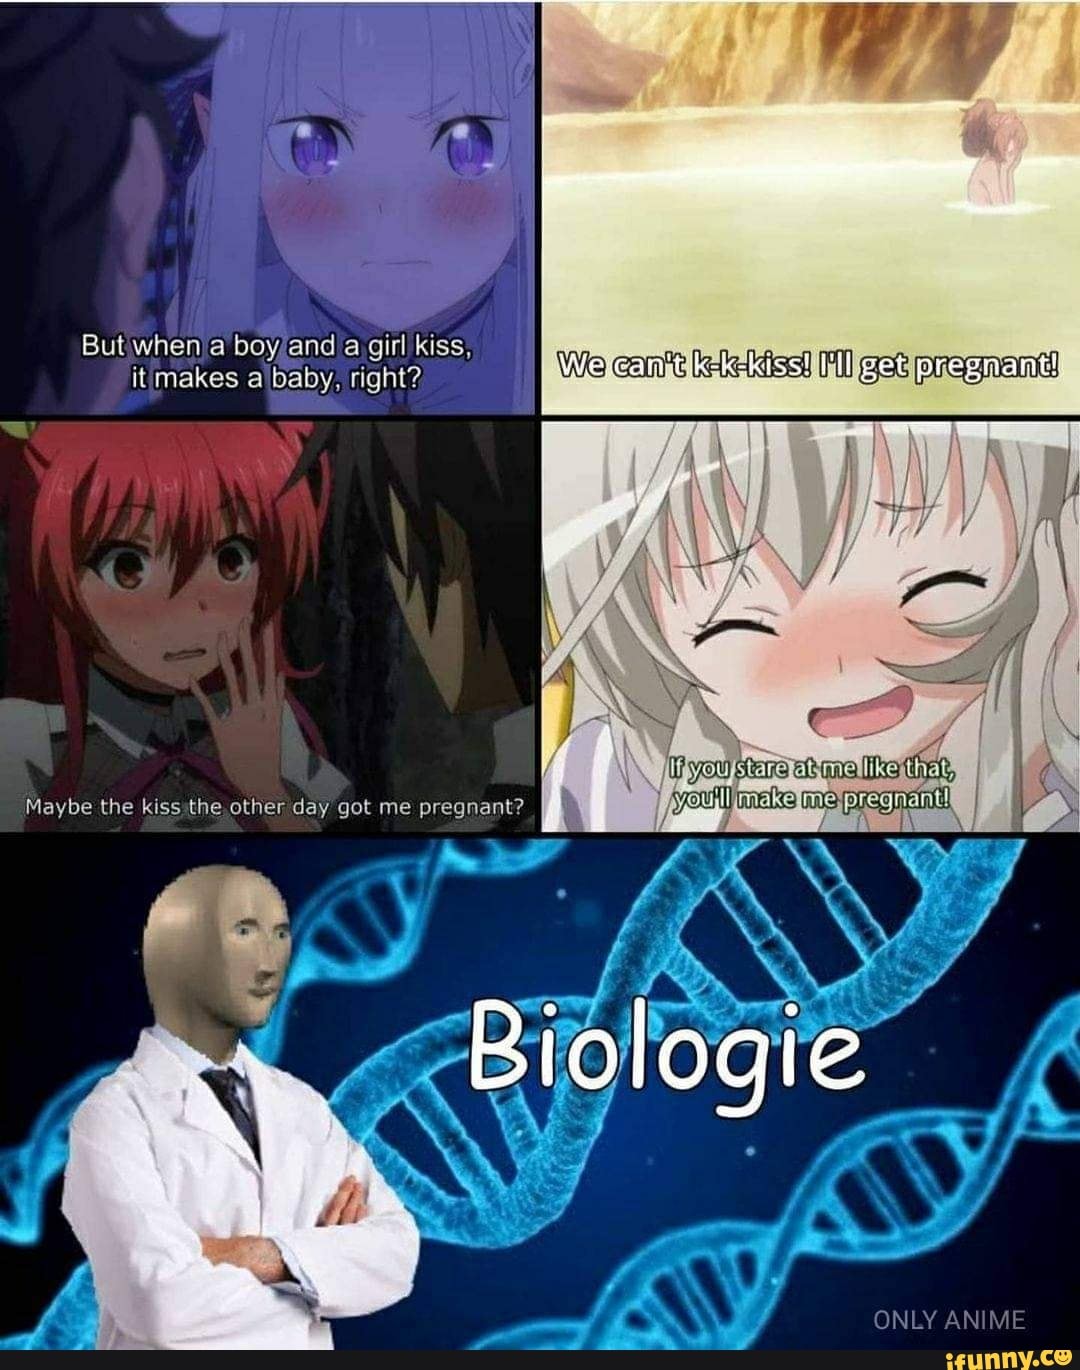 Anime girls be like: Maybe the kiss the othemday got me pregnant? Biology:  - iFunny Brazil